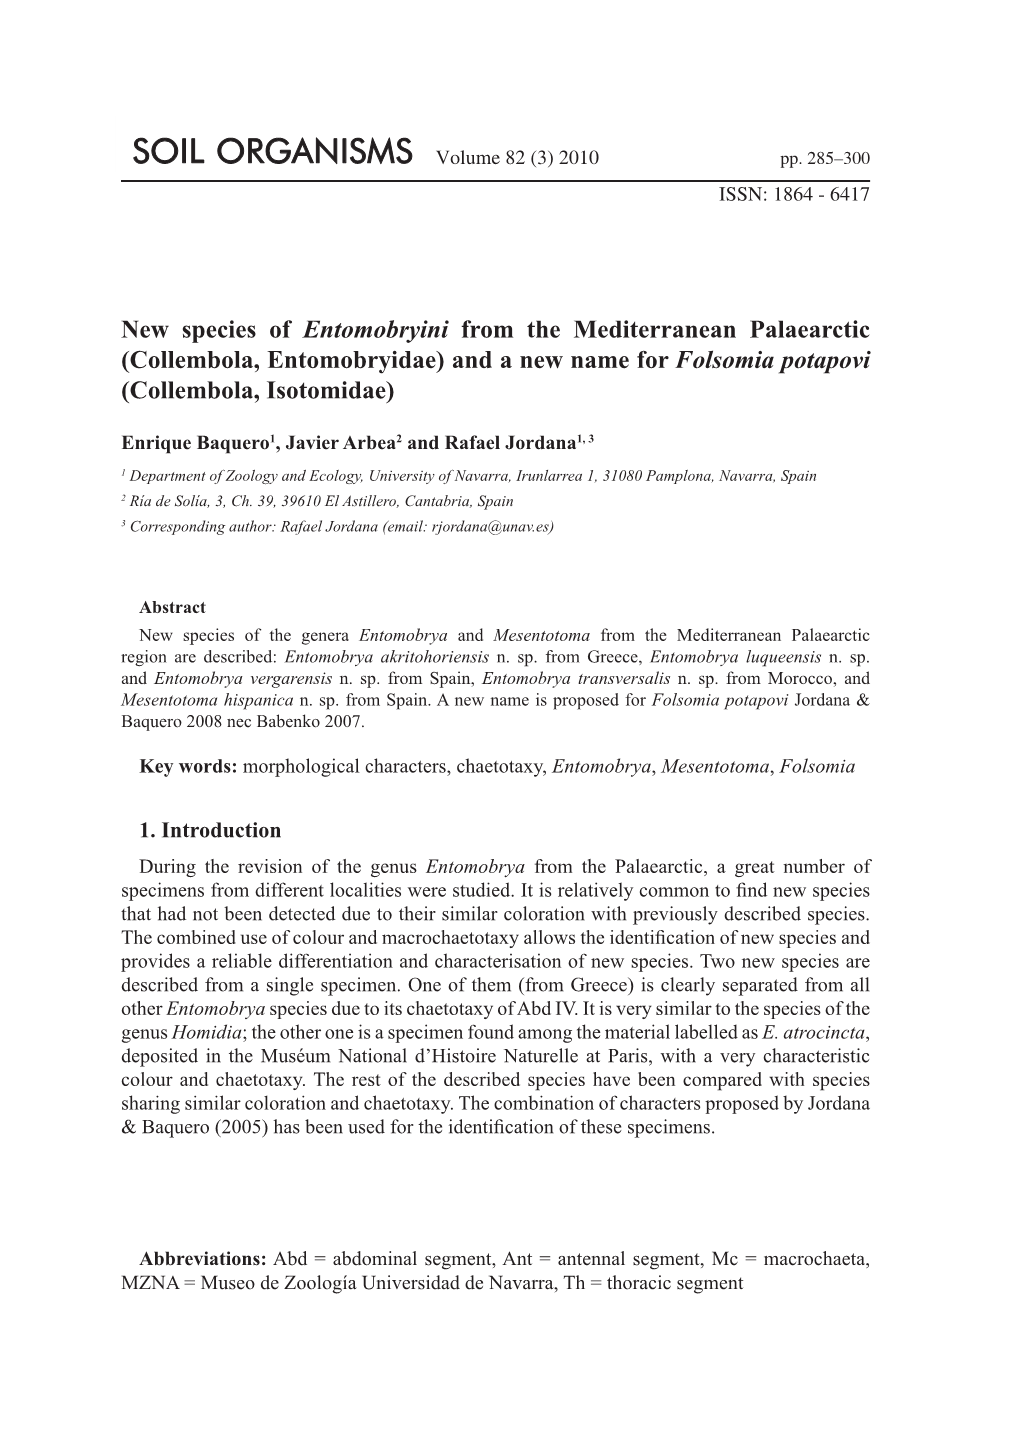 Collembola, Entomobryidae) and a New Name for Folsomia Potapovi (Collembola, Isotomidae)